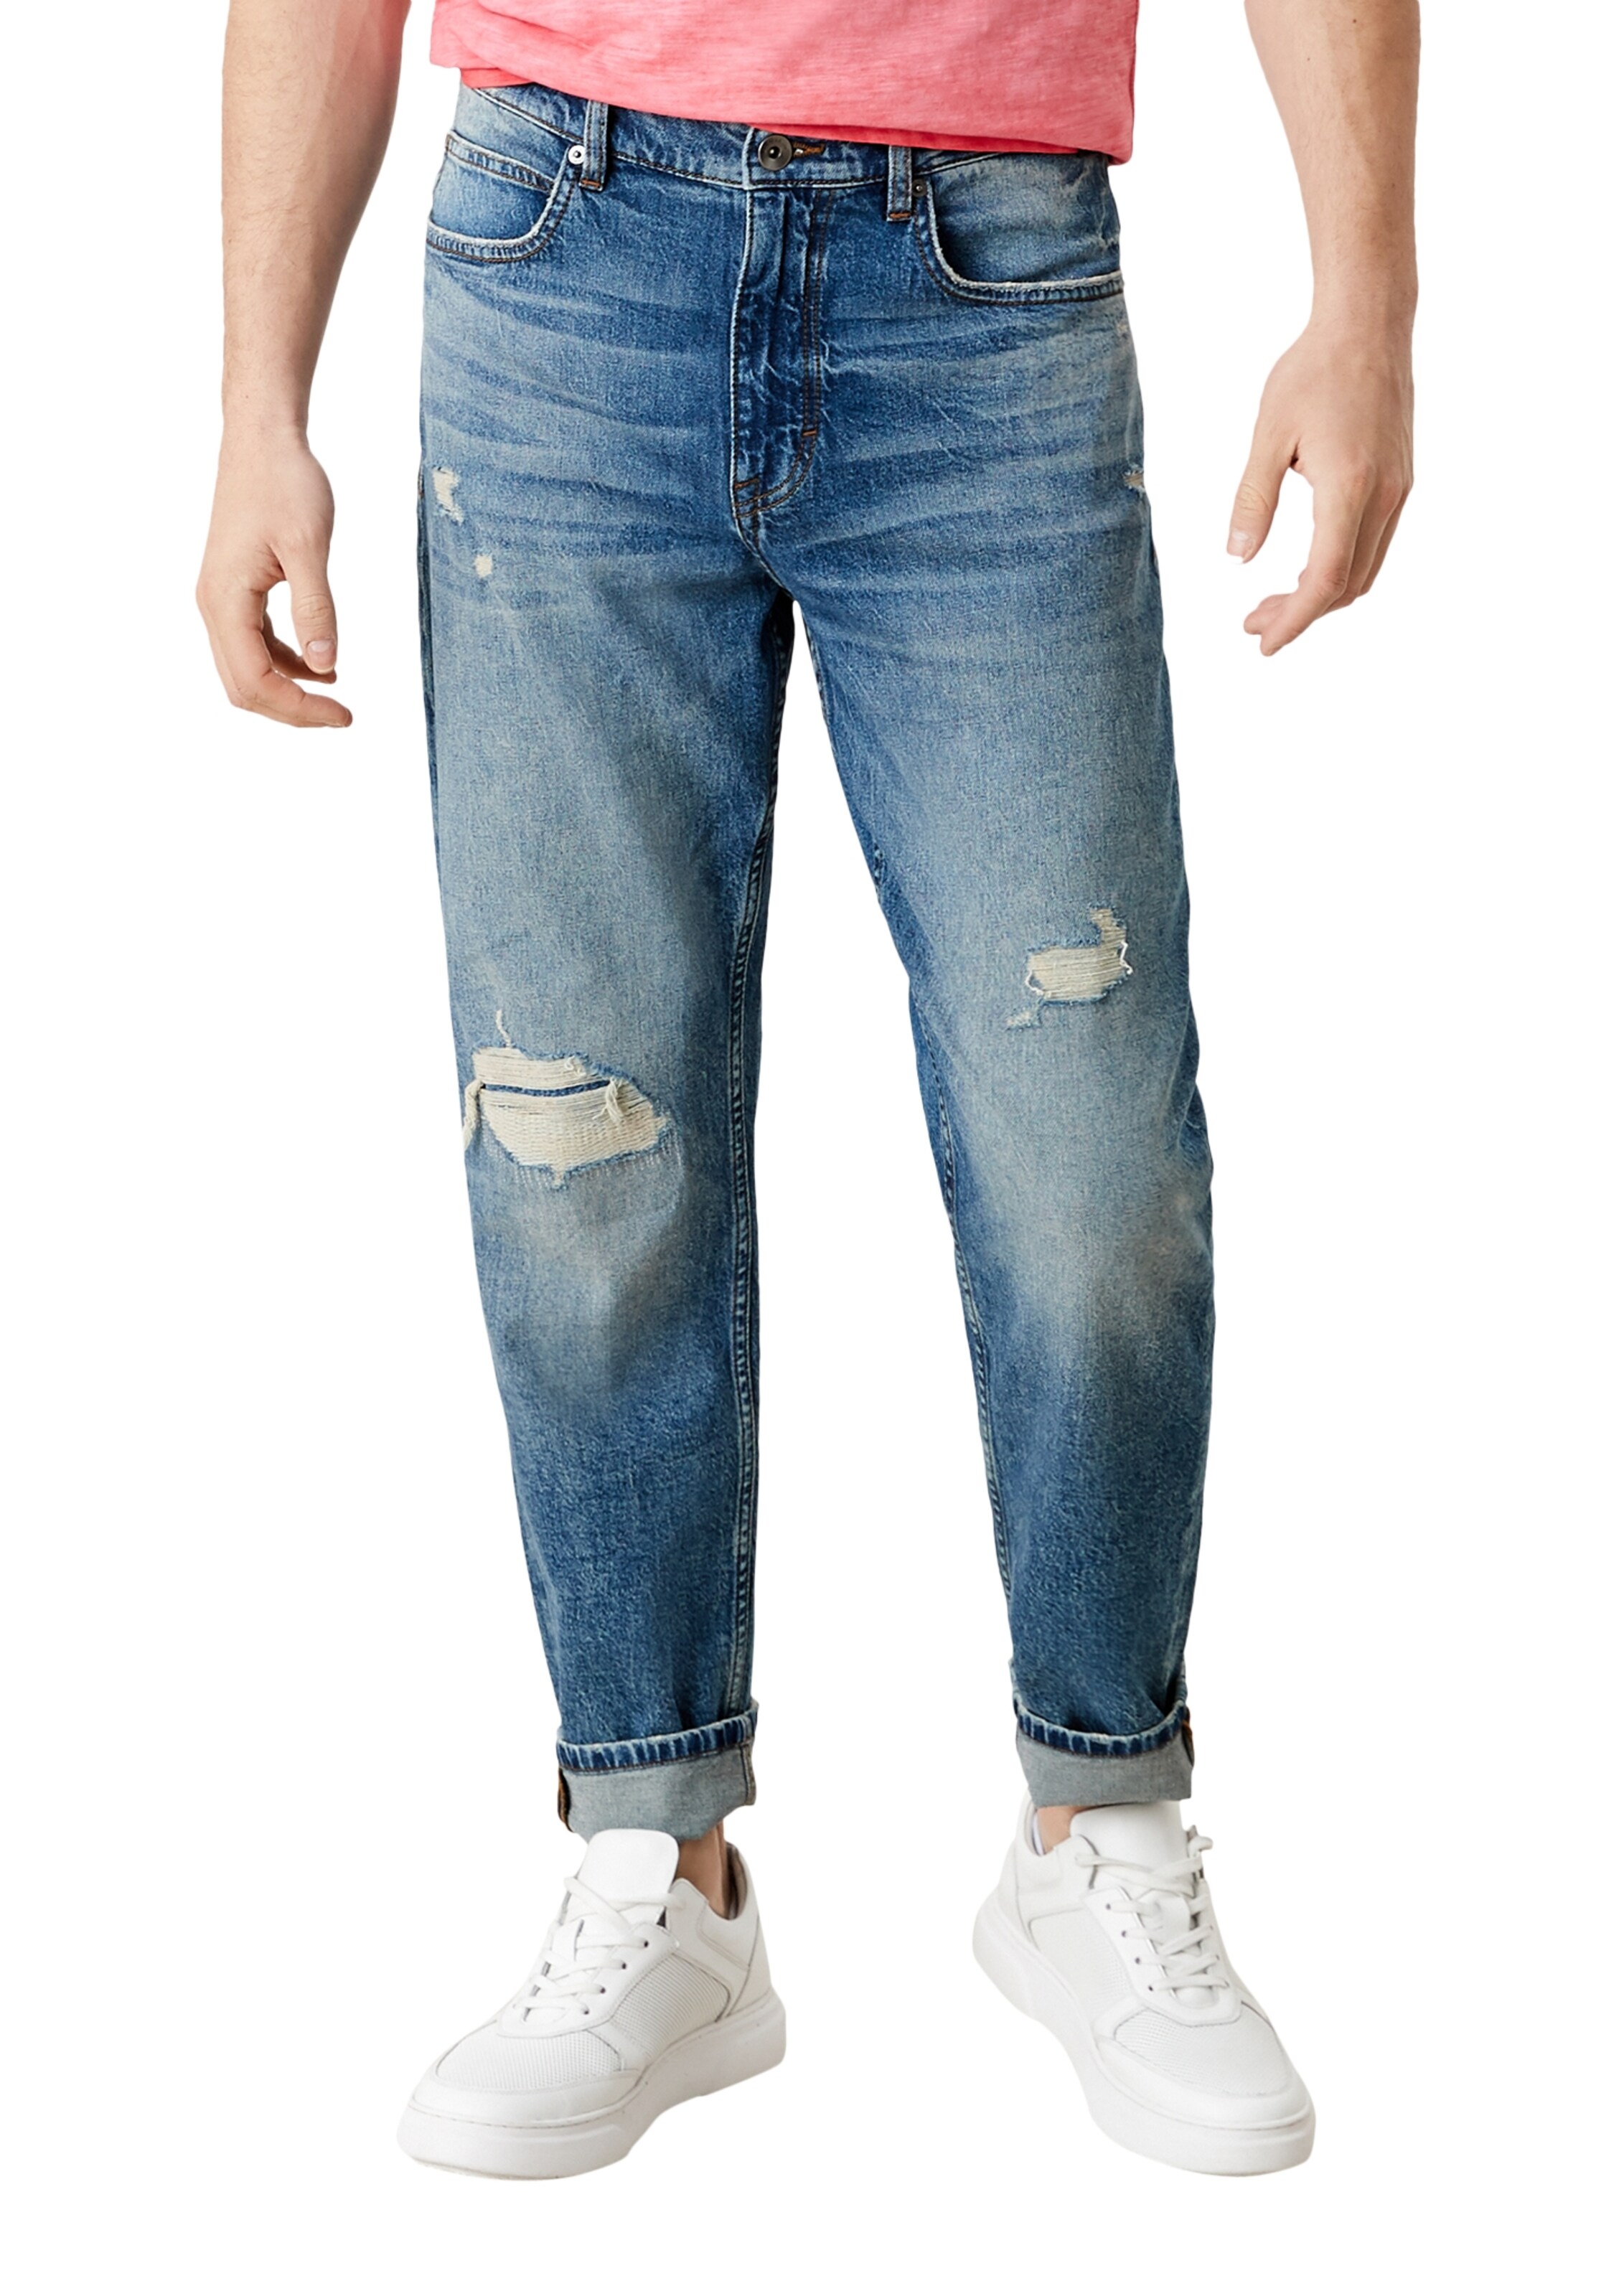 Männer Jeans QS by s.Oliver Jeans in Blau - YK13690